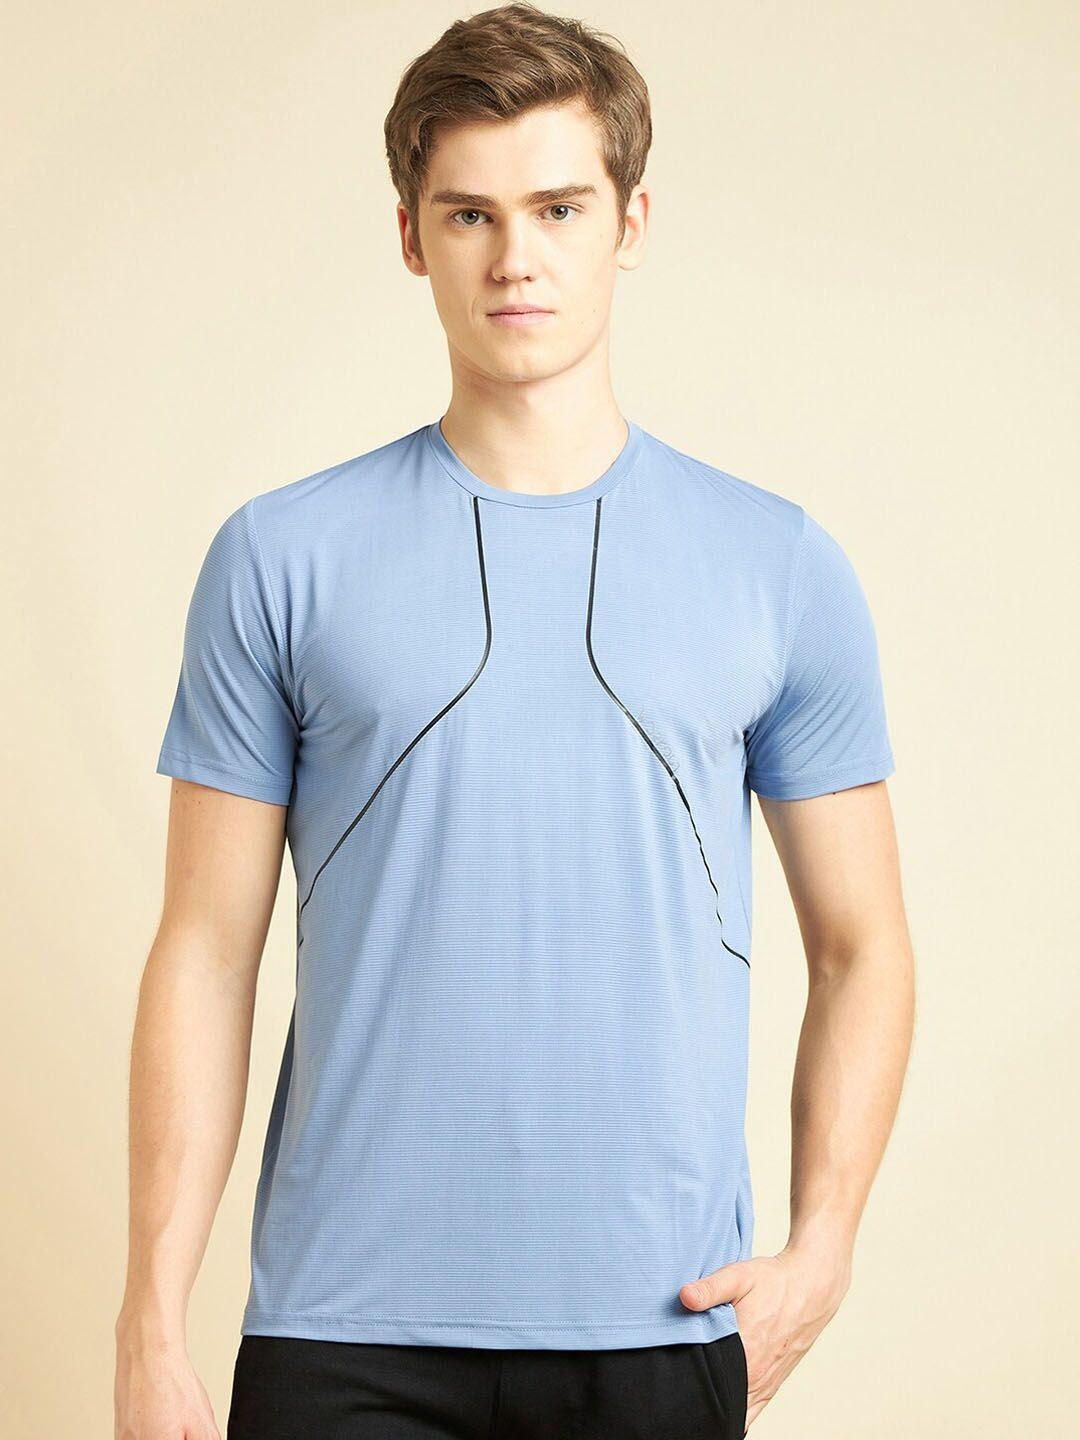 sweet-dreams-blue-round-neck-sports-t-shirt